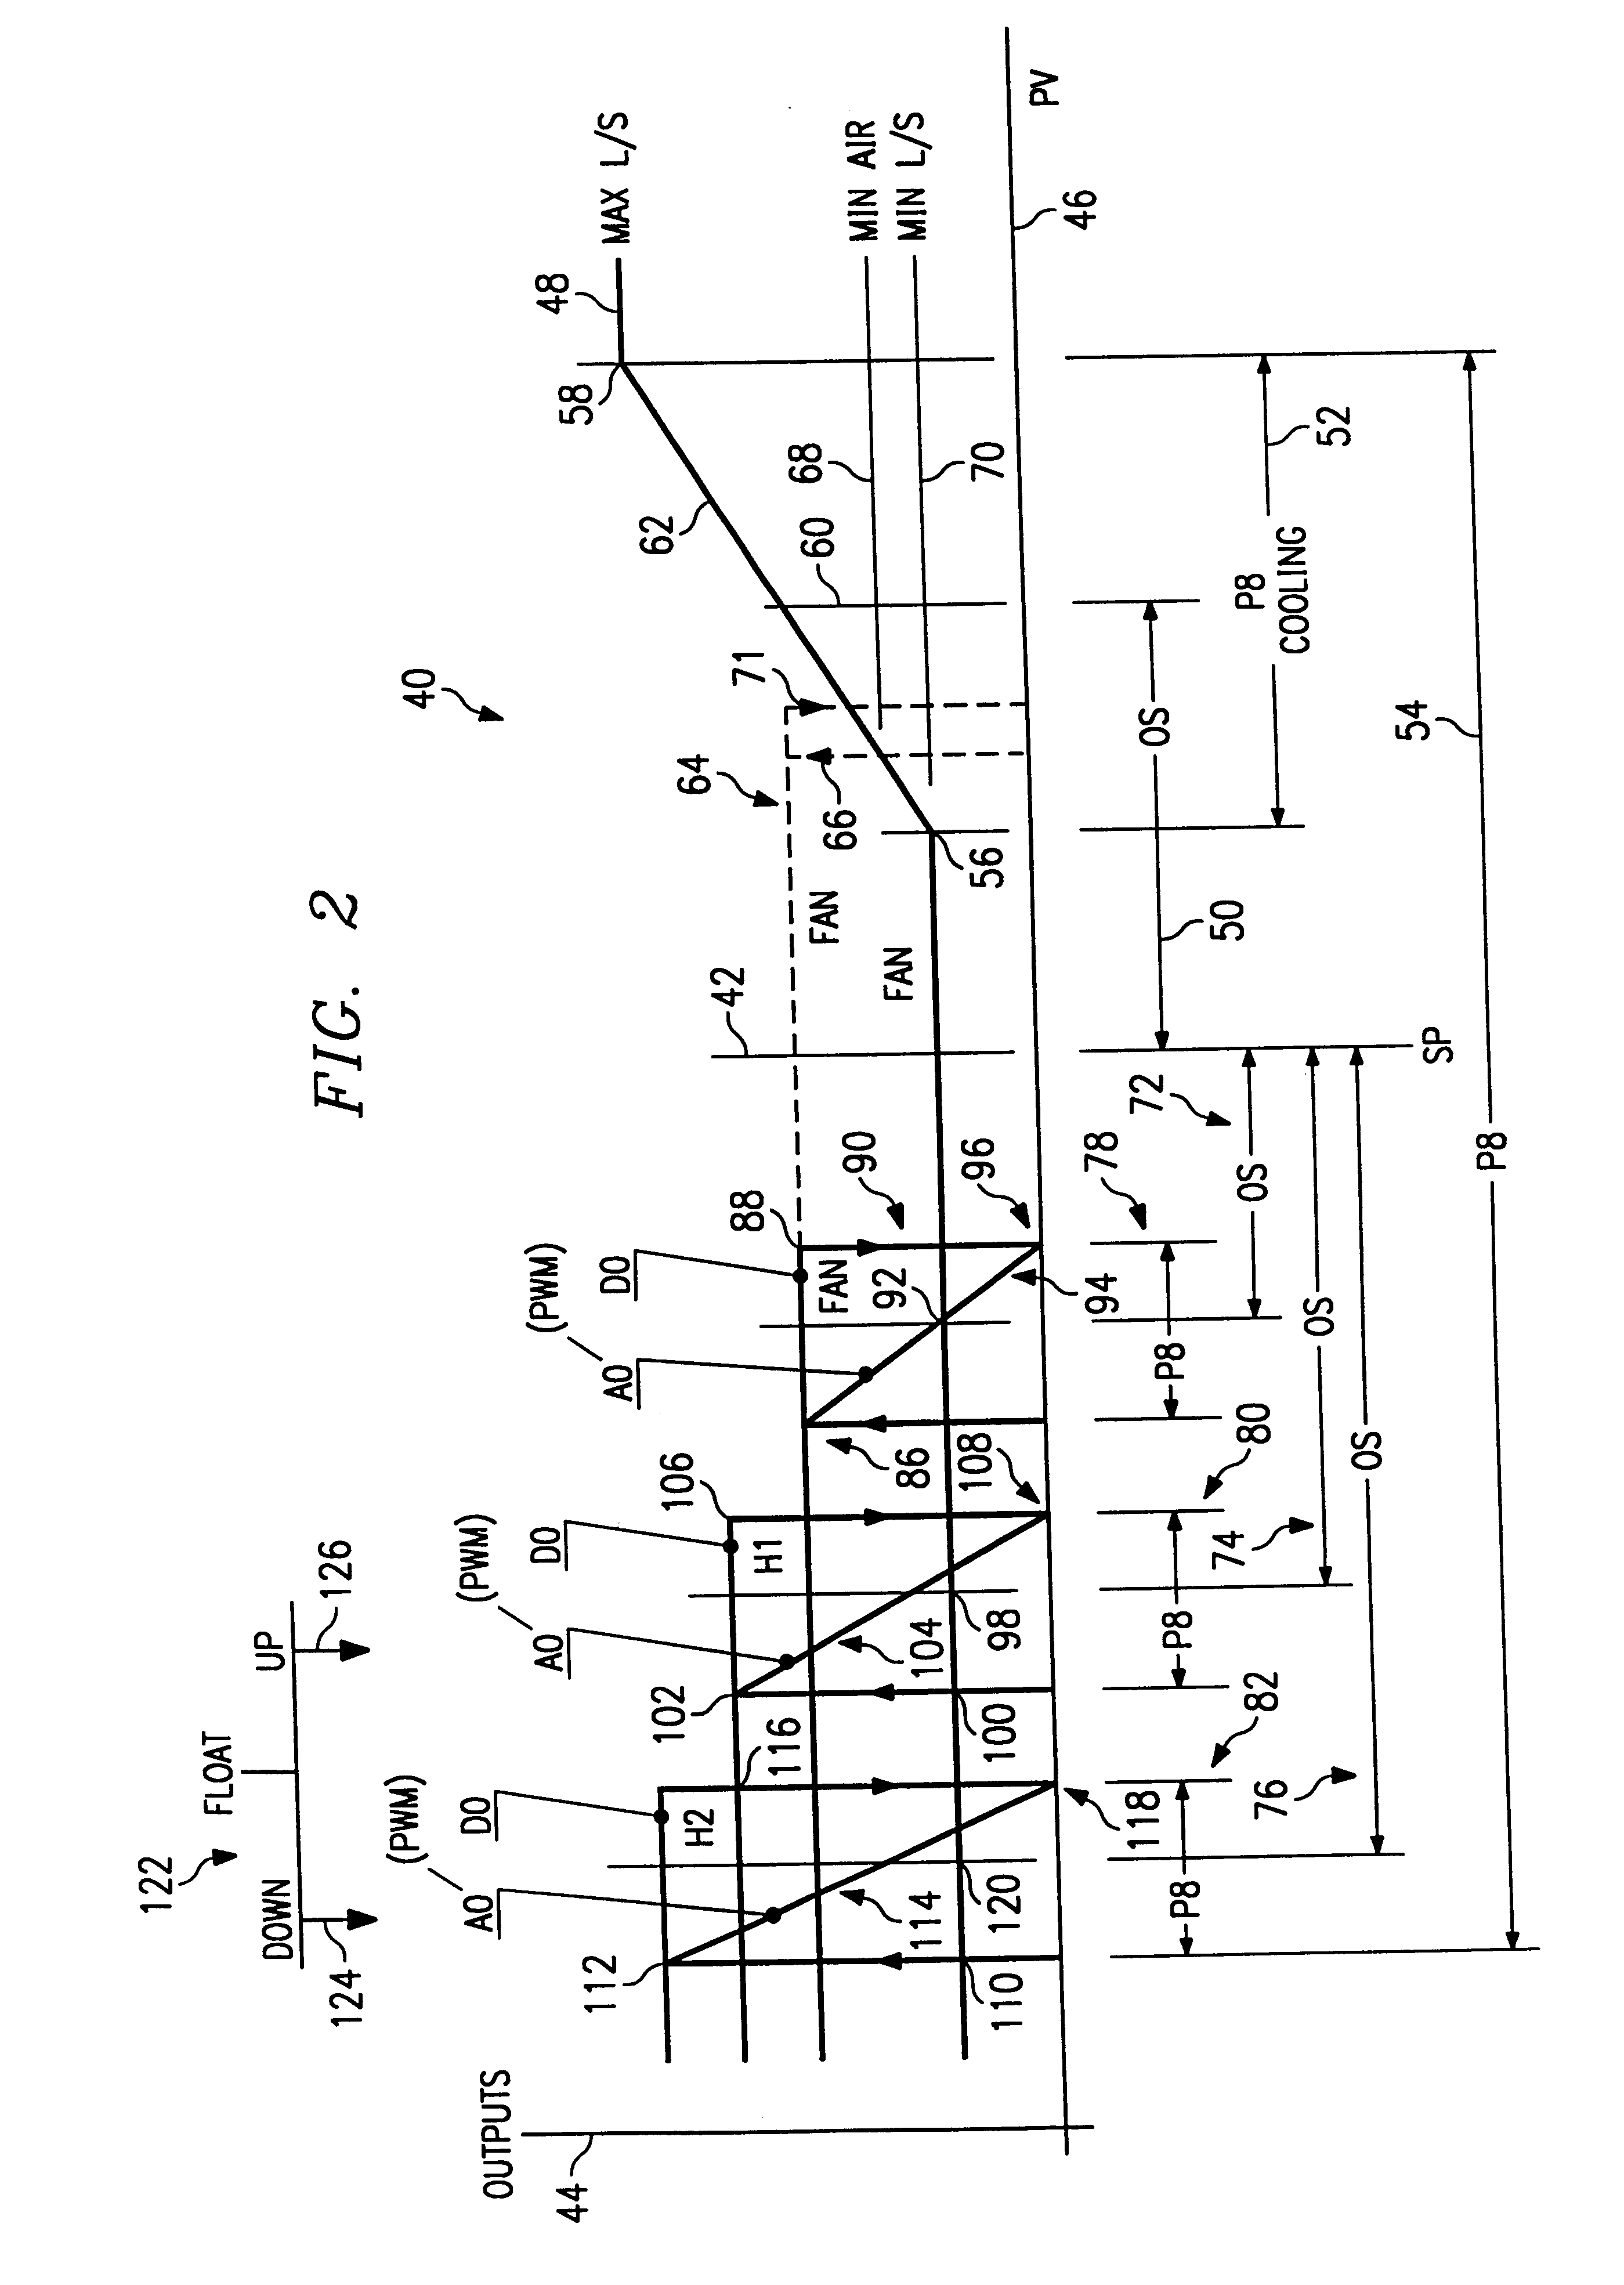 Variable air volume environmental management system including a fuzzy logic control system